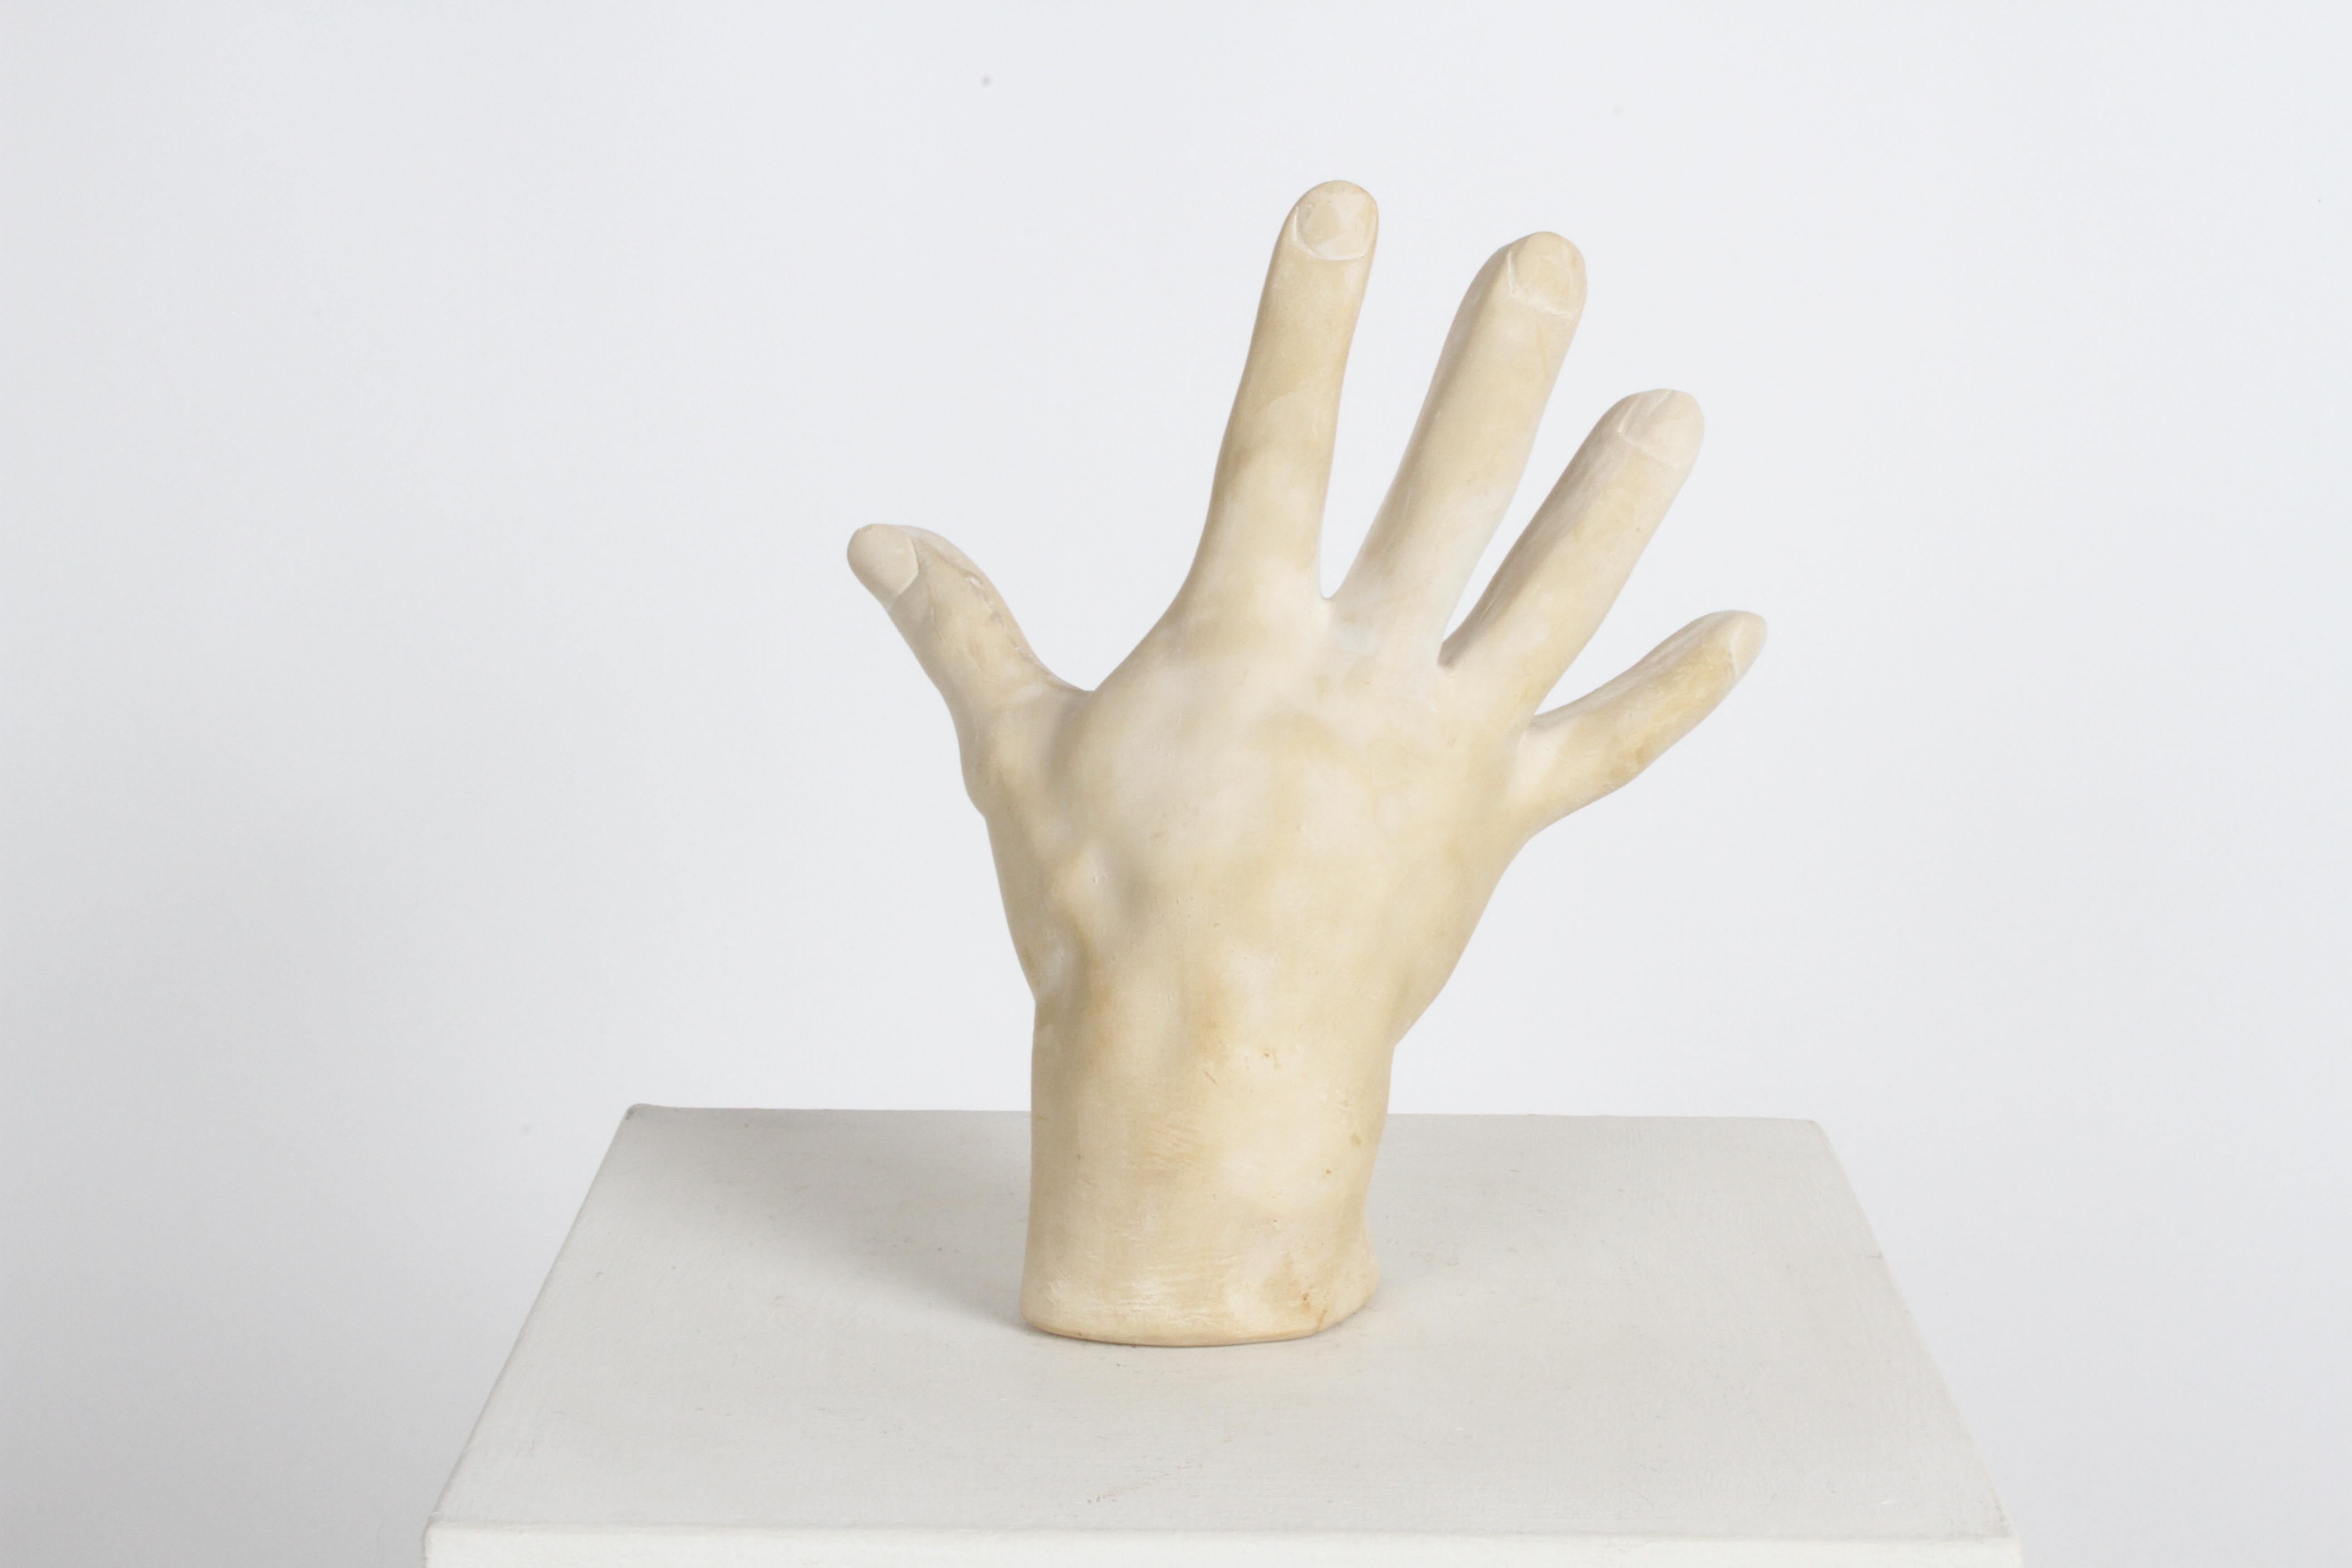 Larger than life 1970s cast plaster hand sculpture, possible artist or hand study, in the style of John Dickinson.
Plaster has slight tan wash over the white plaster. No breaks or damage noted.